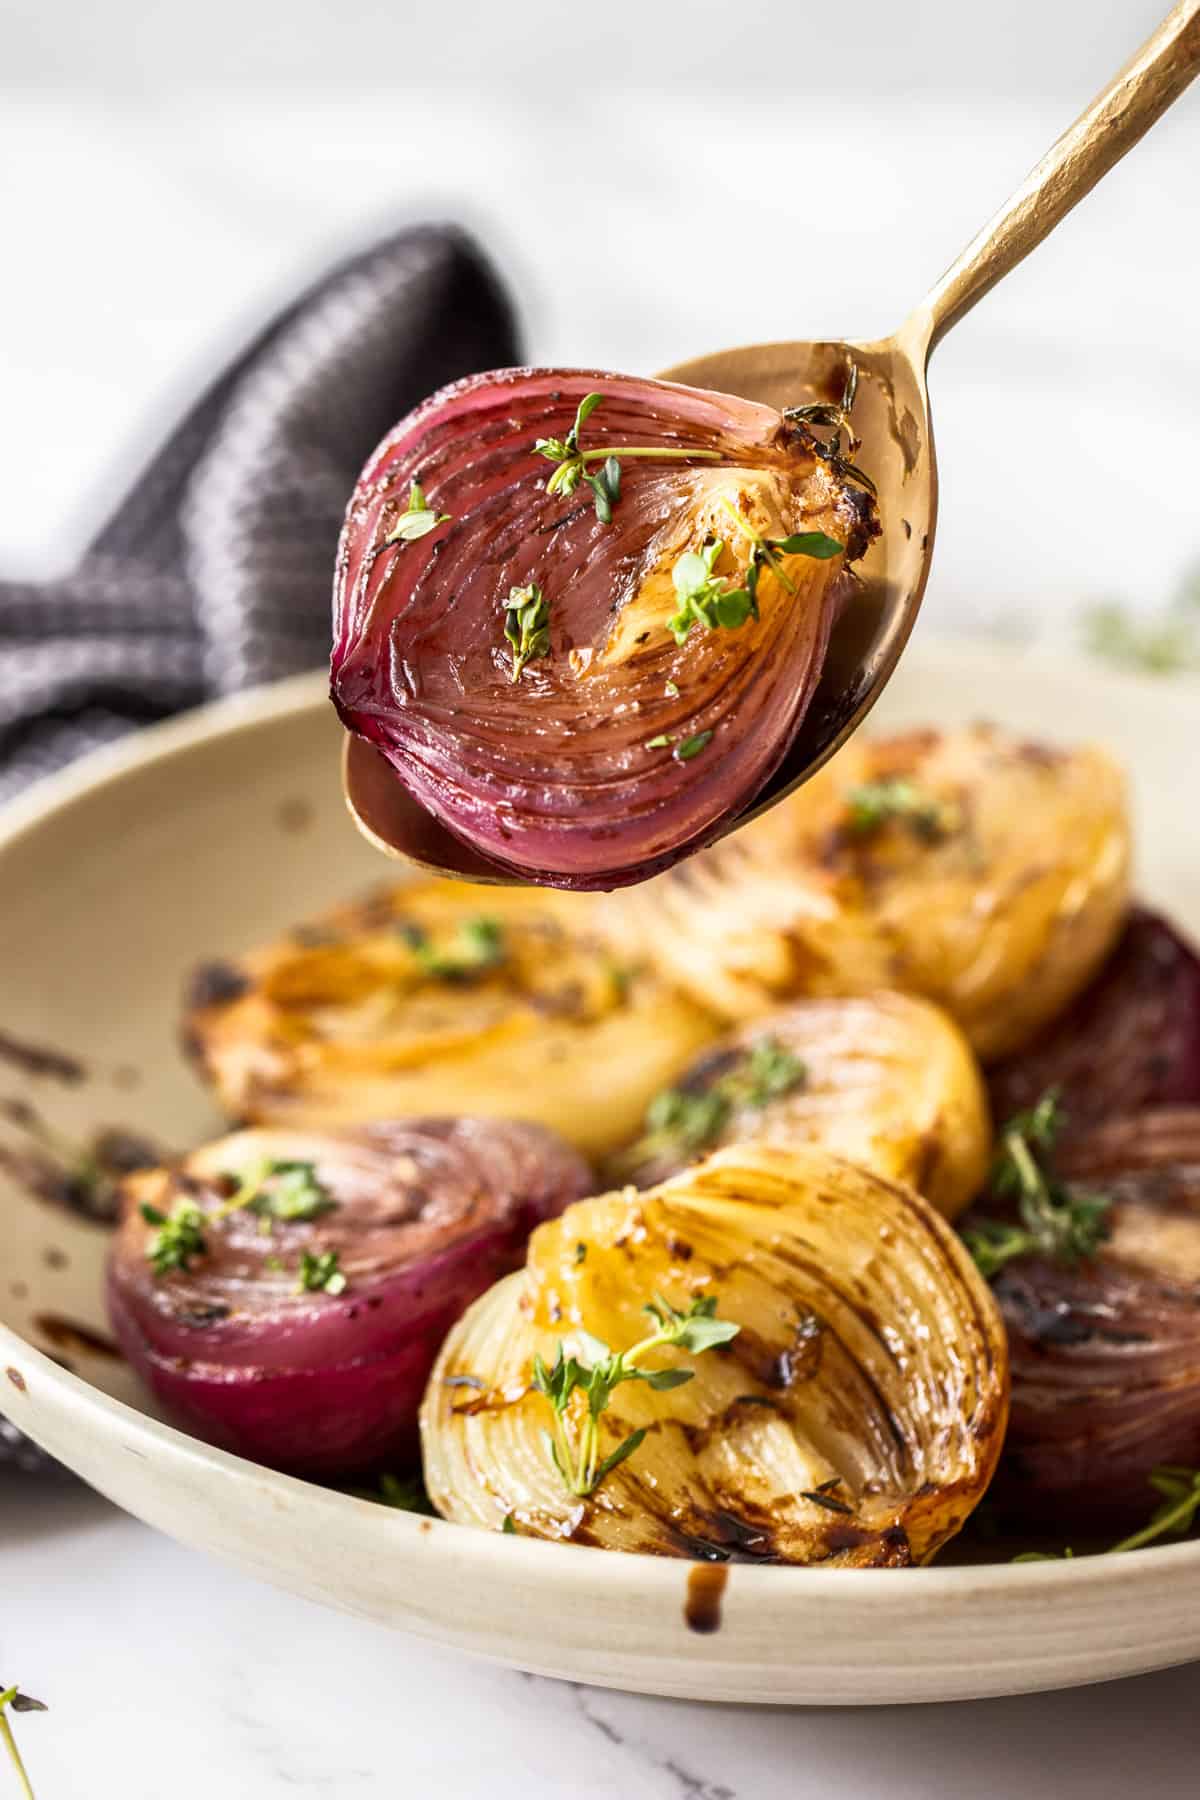 Spoon holding up a roasted onion half from a dish of roasted onions.